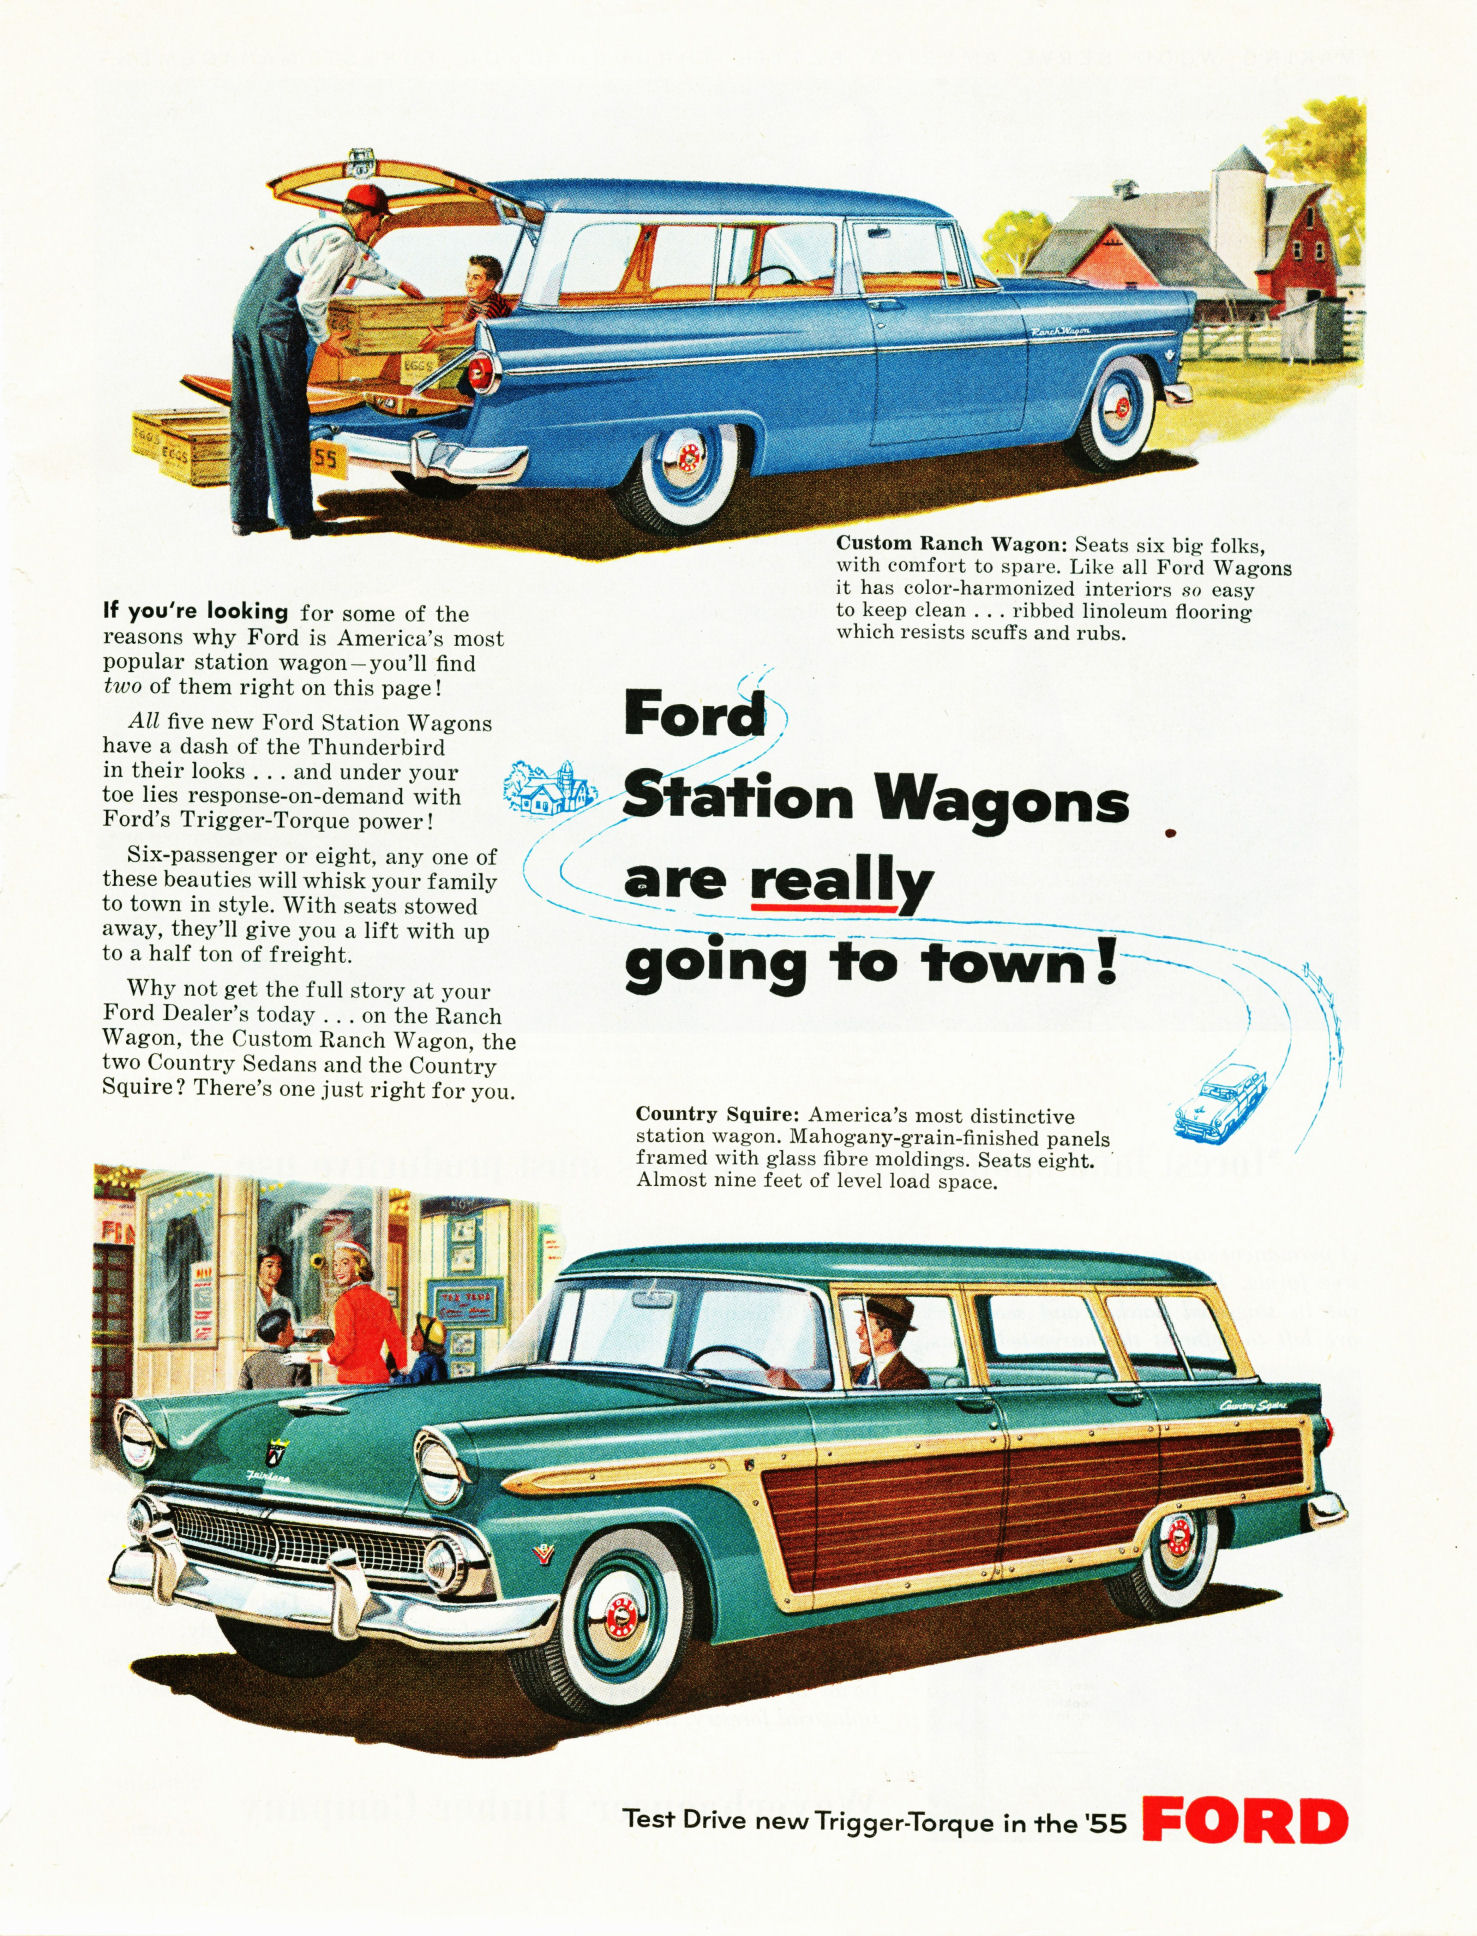 1955 Ford ads #8